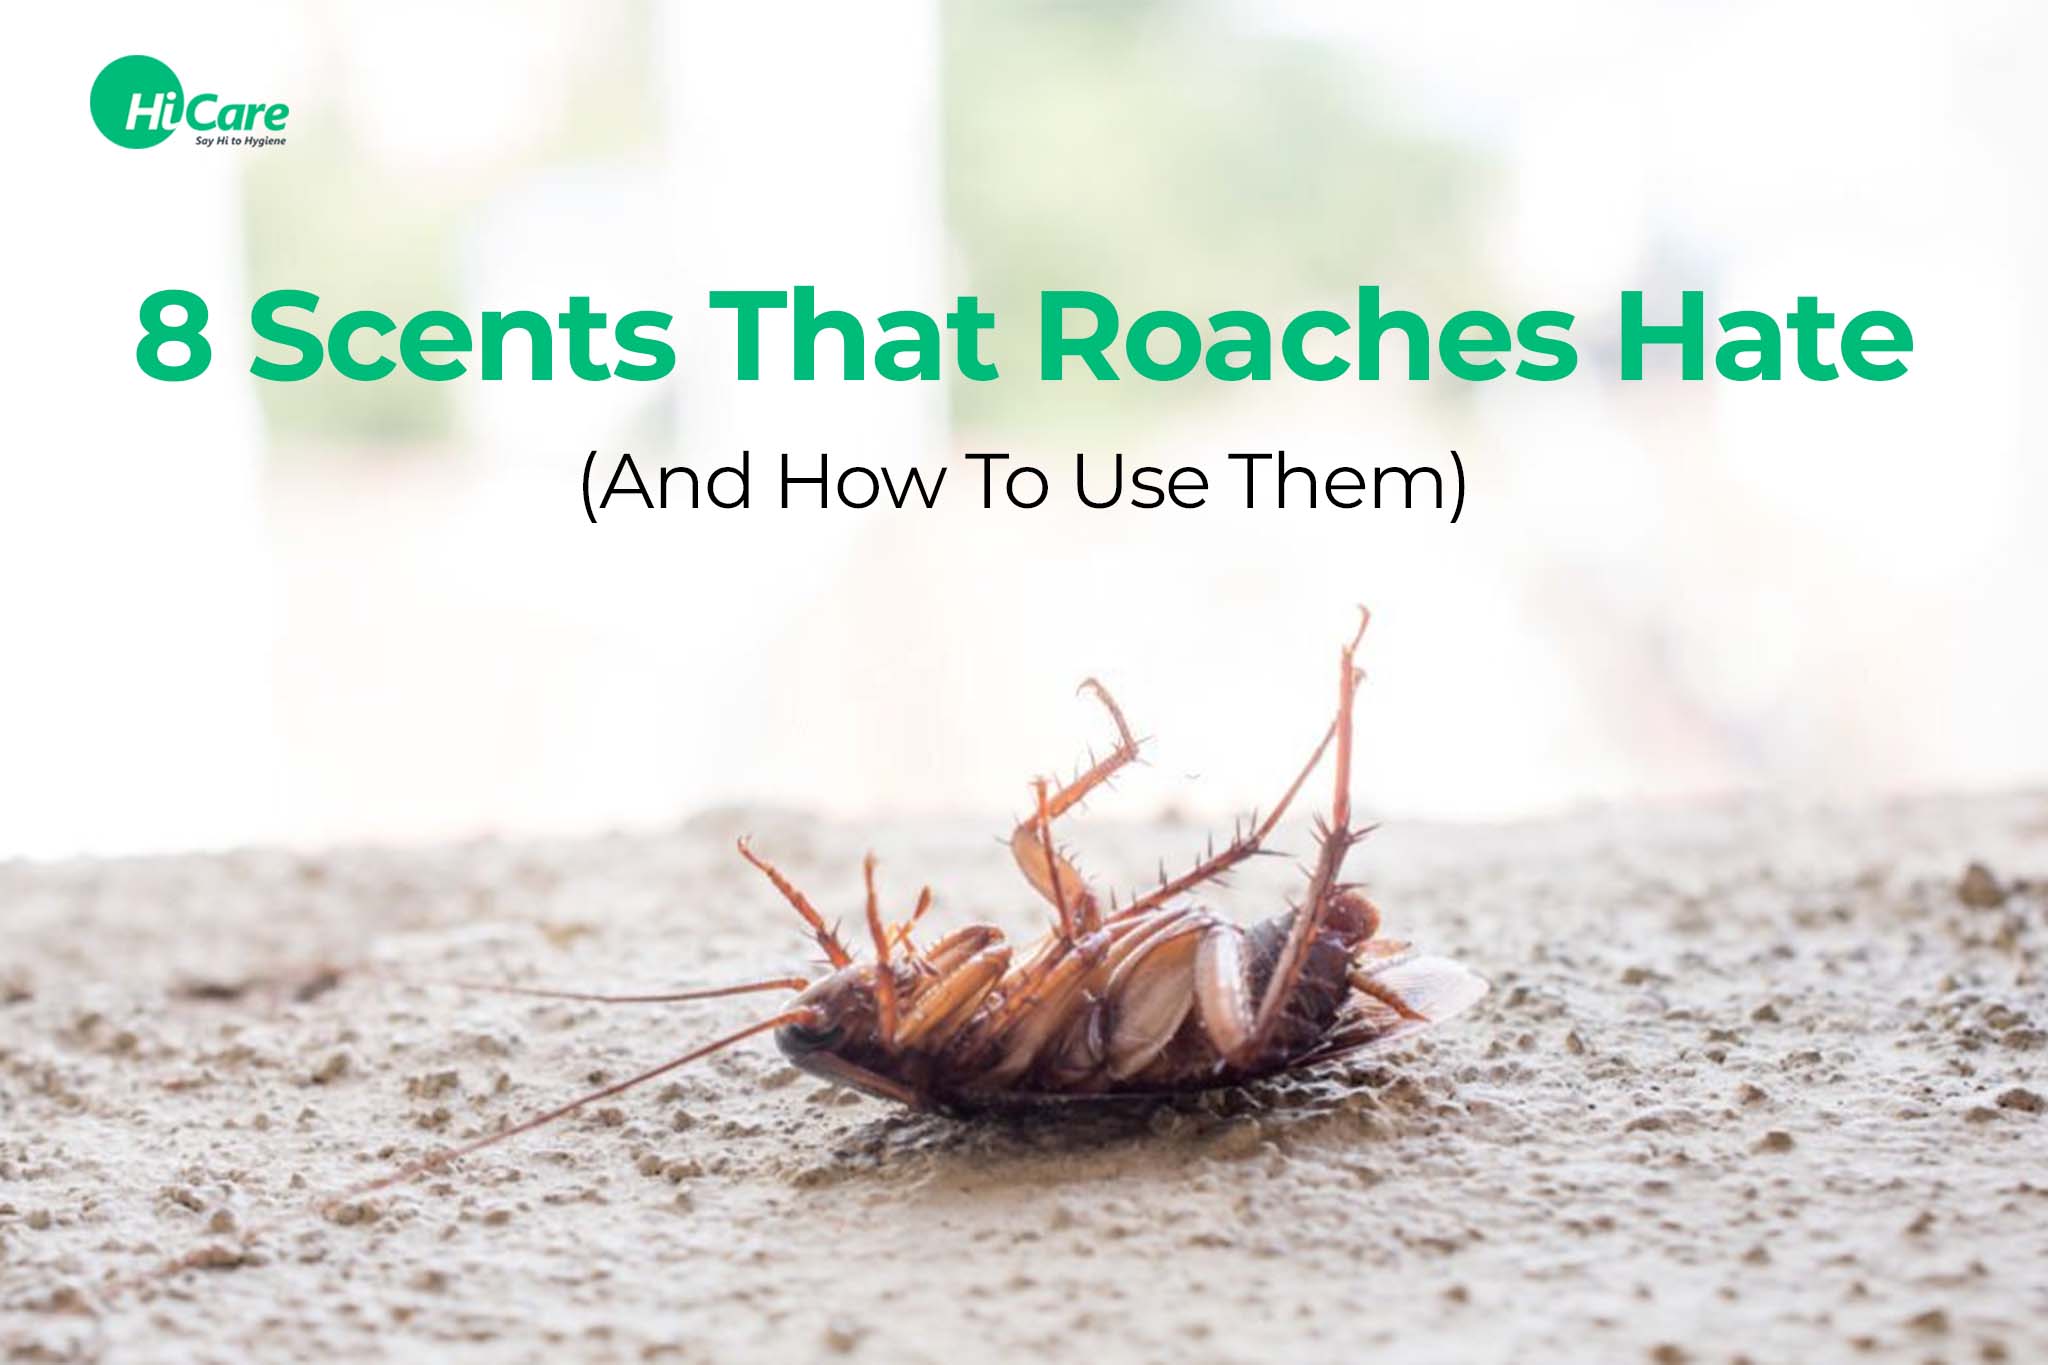 8 Scents that Cockroaches Hate (How to Use Them)